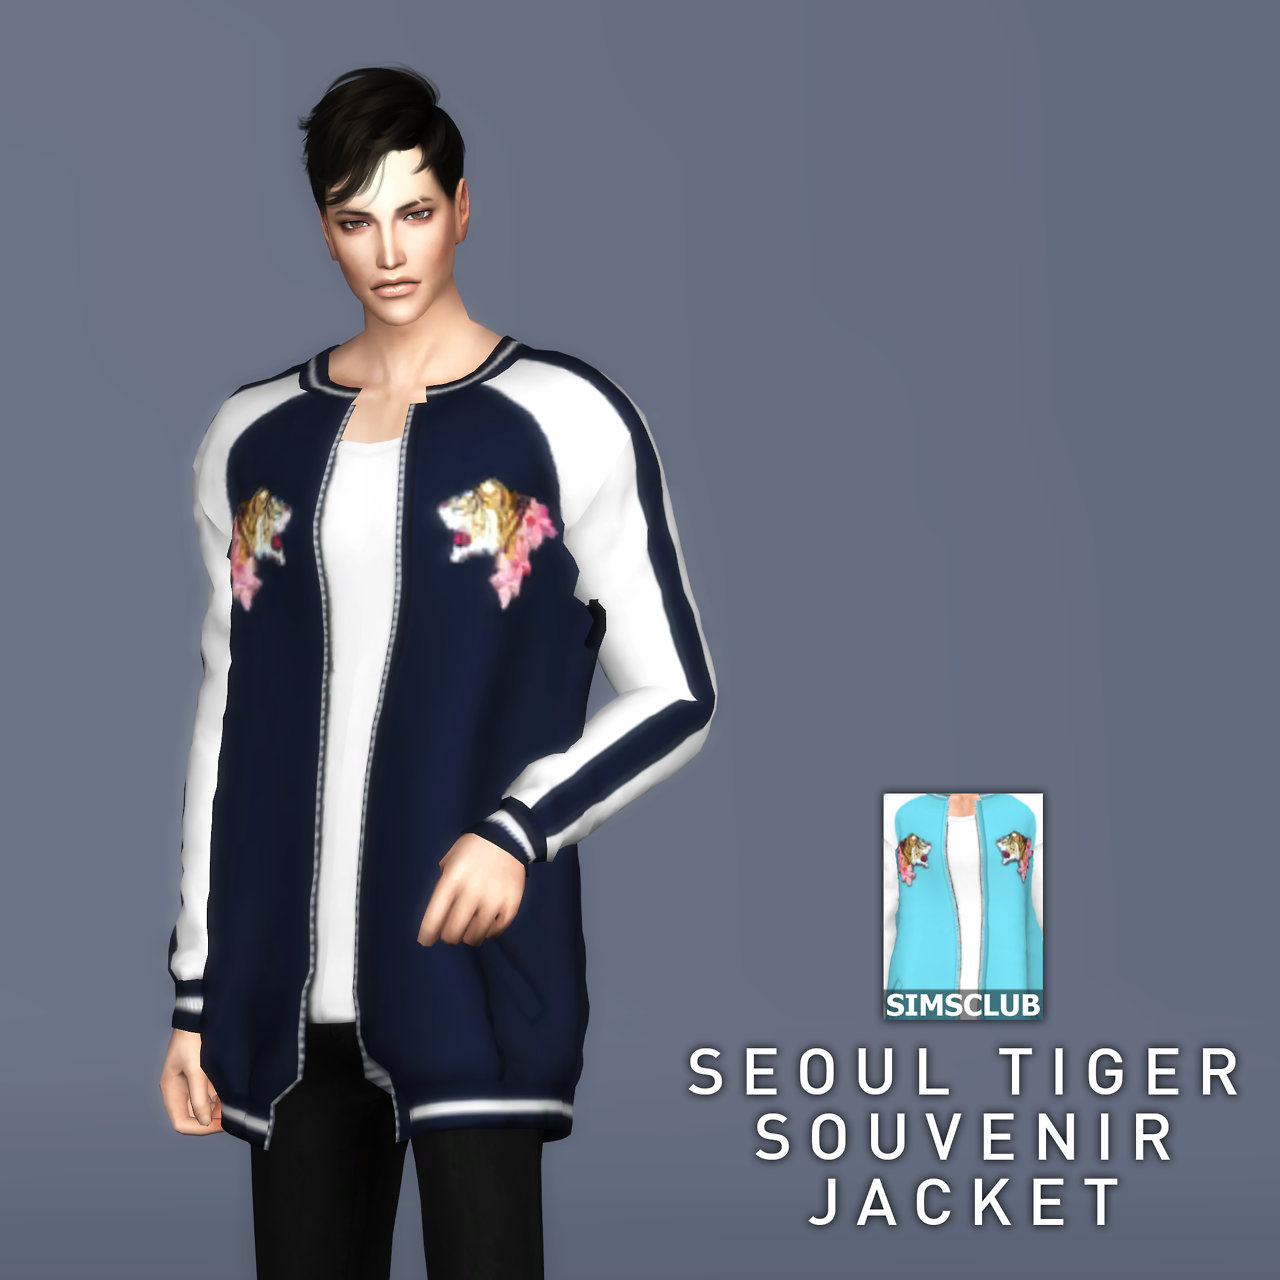 Sims 4 Ccs The Best Male Clothing By Simsclub